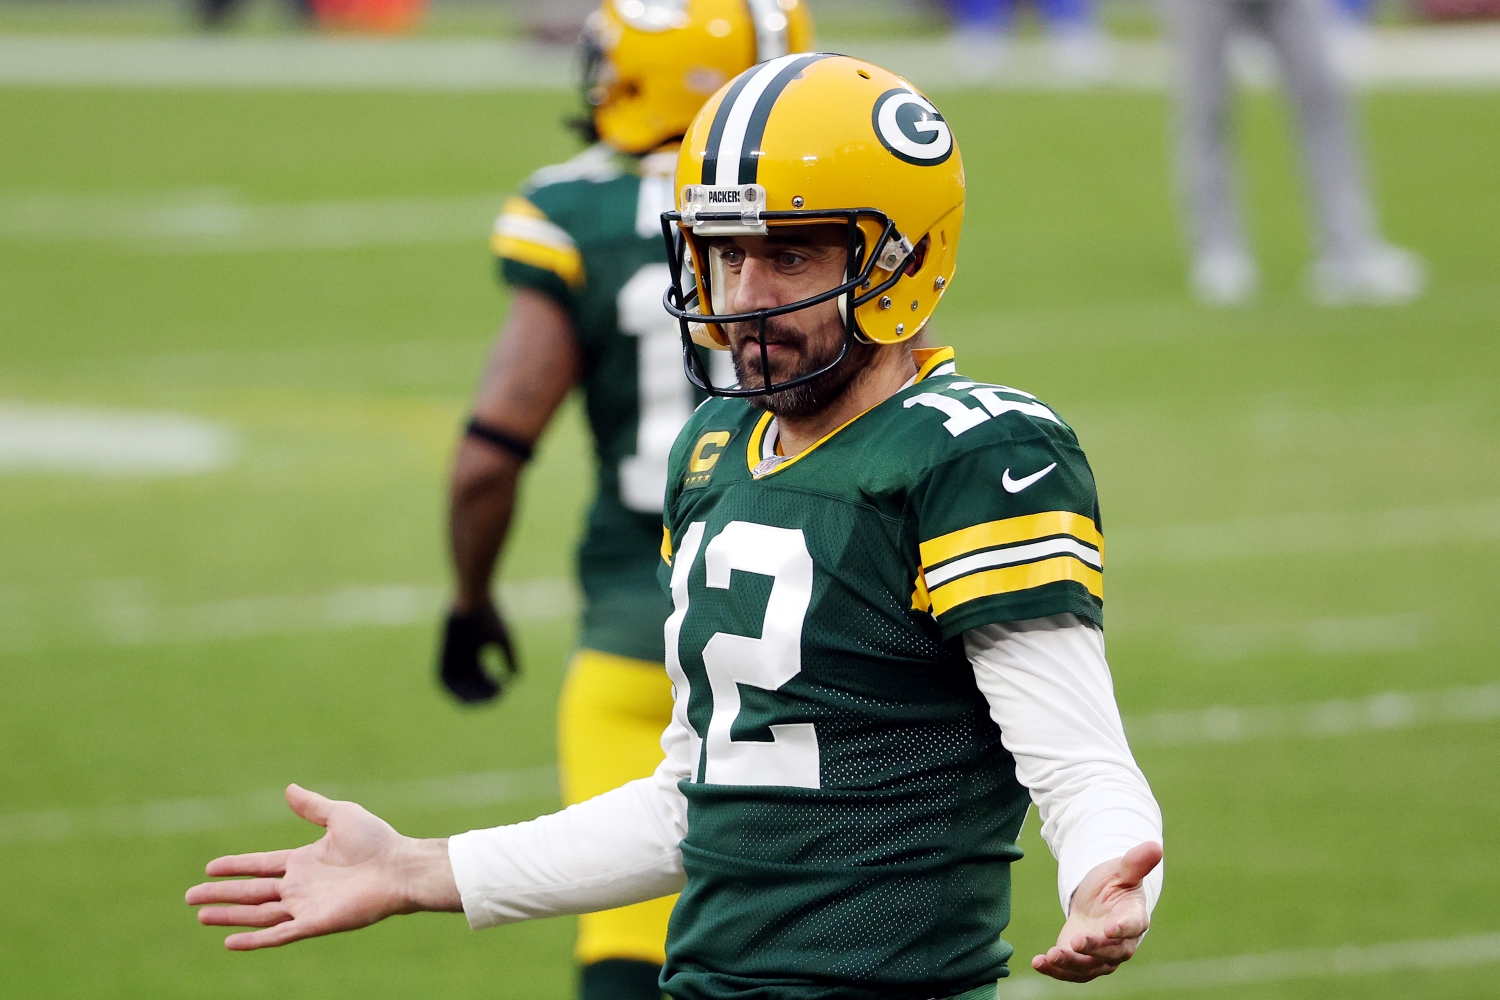 Green Bay Packers quarterback Aaron Rodgers motions to the sideline before a game.